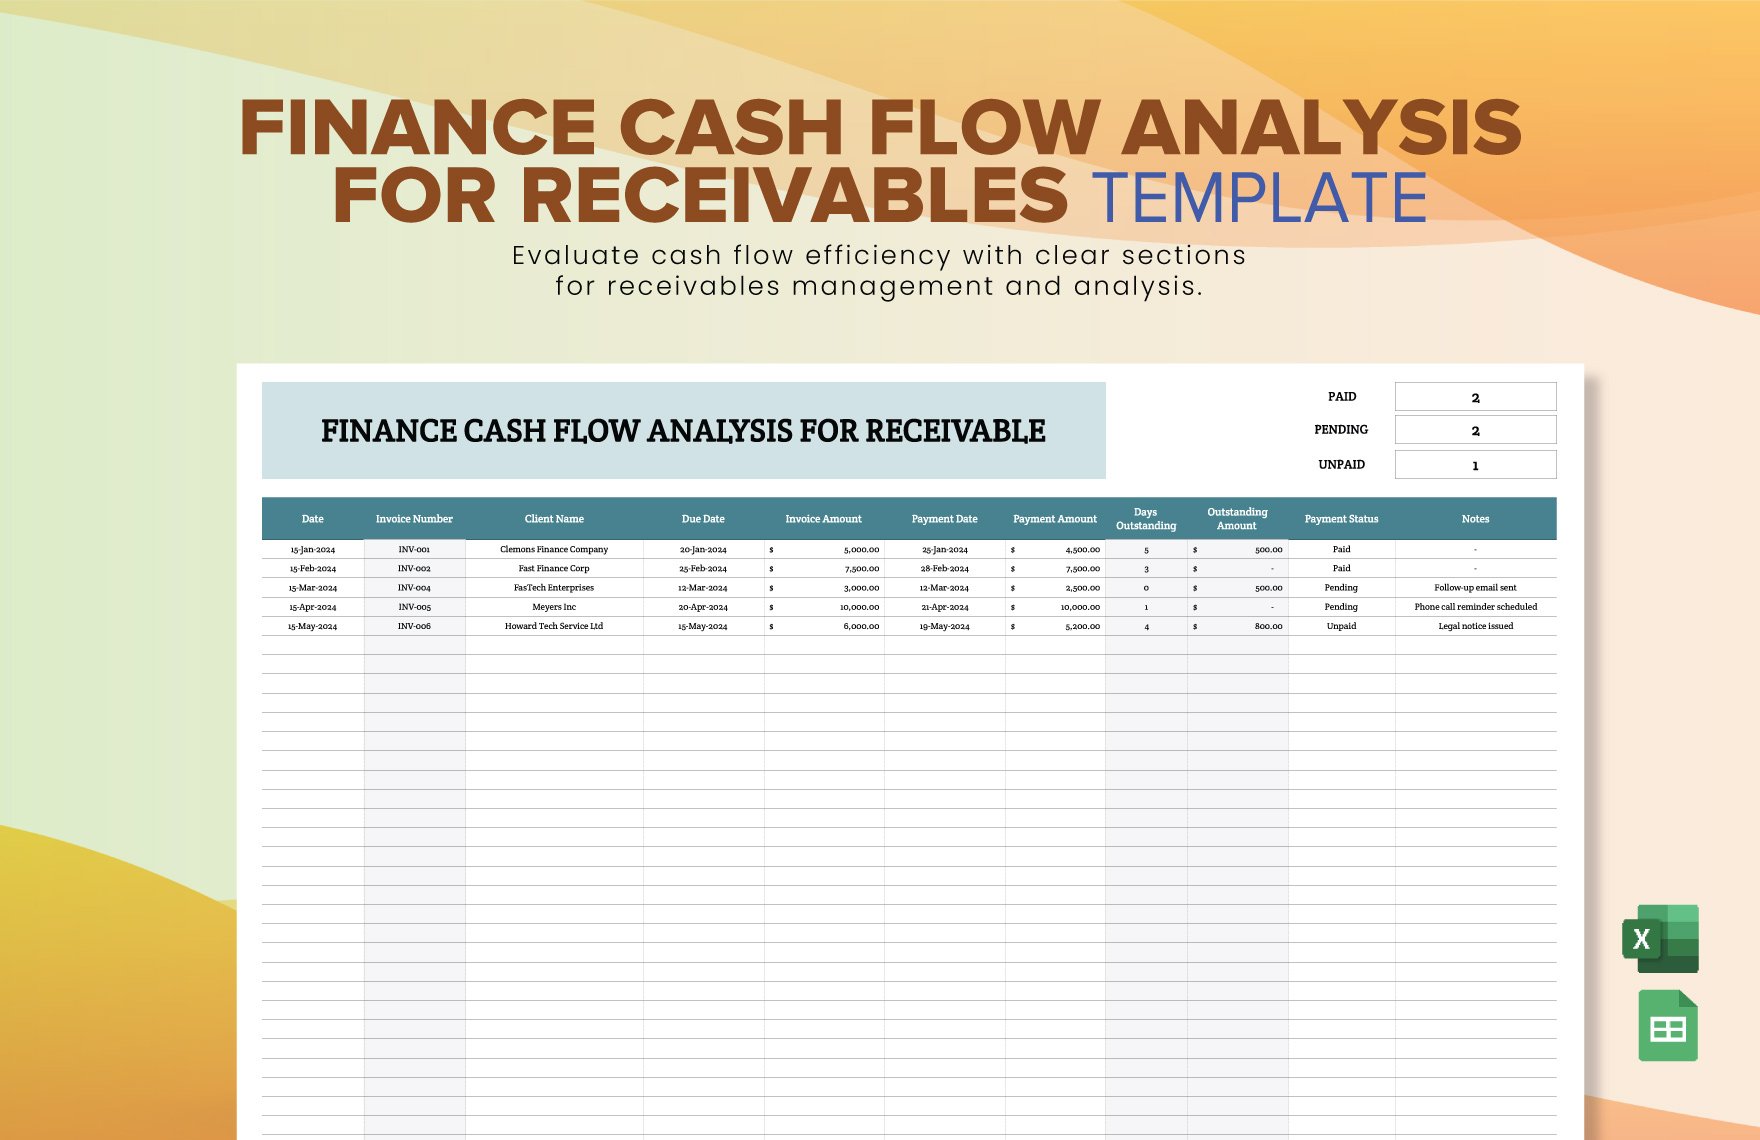 Finance Cash Flow Analysis for Receivables Template in Excel, Google Sheets